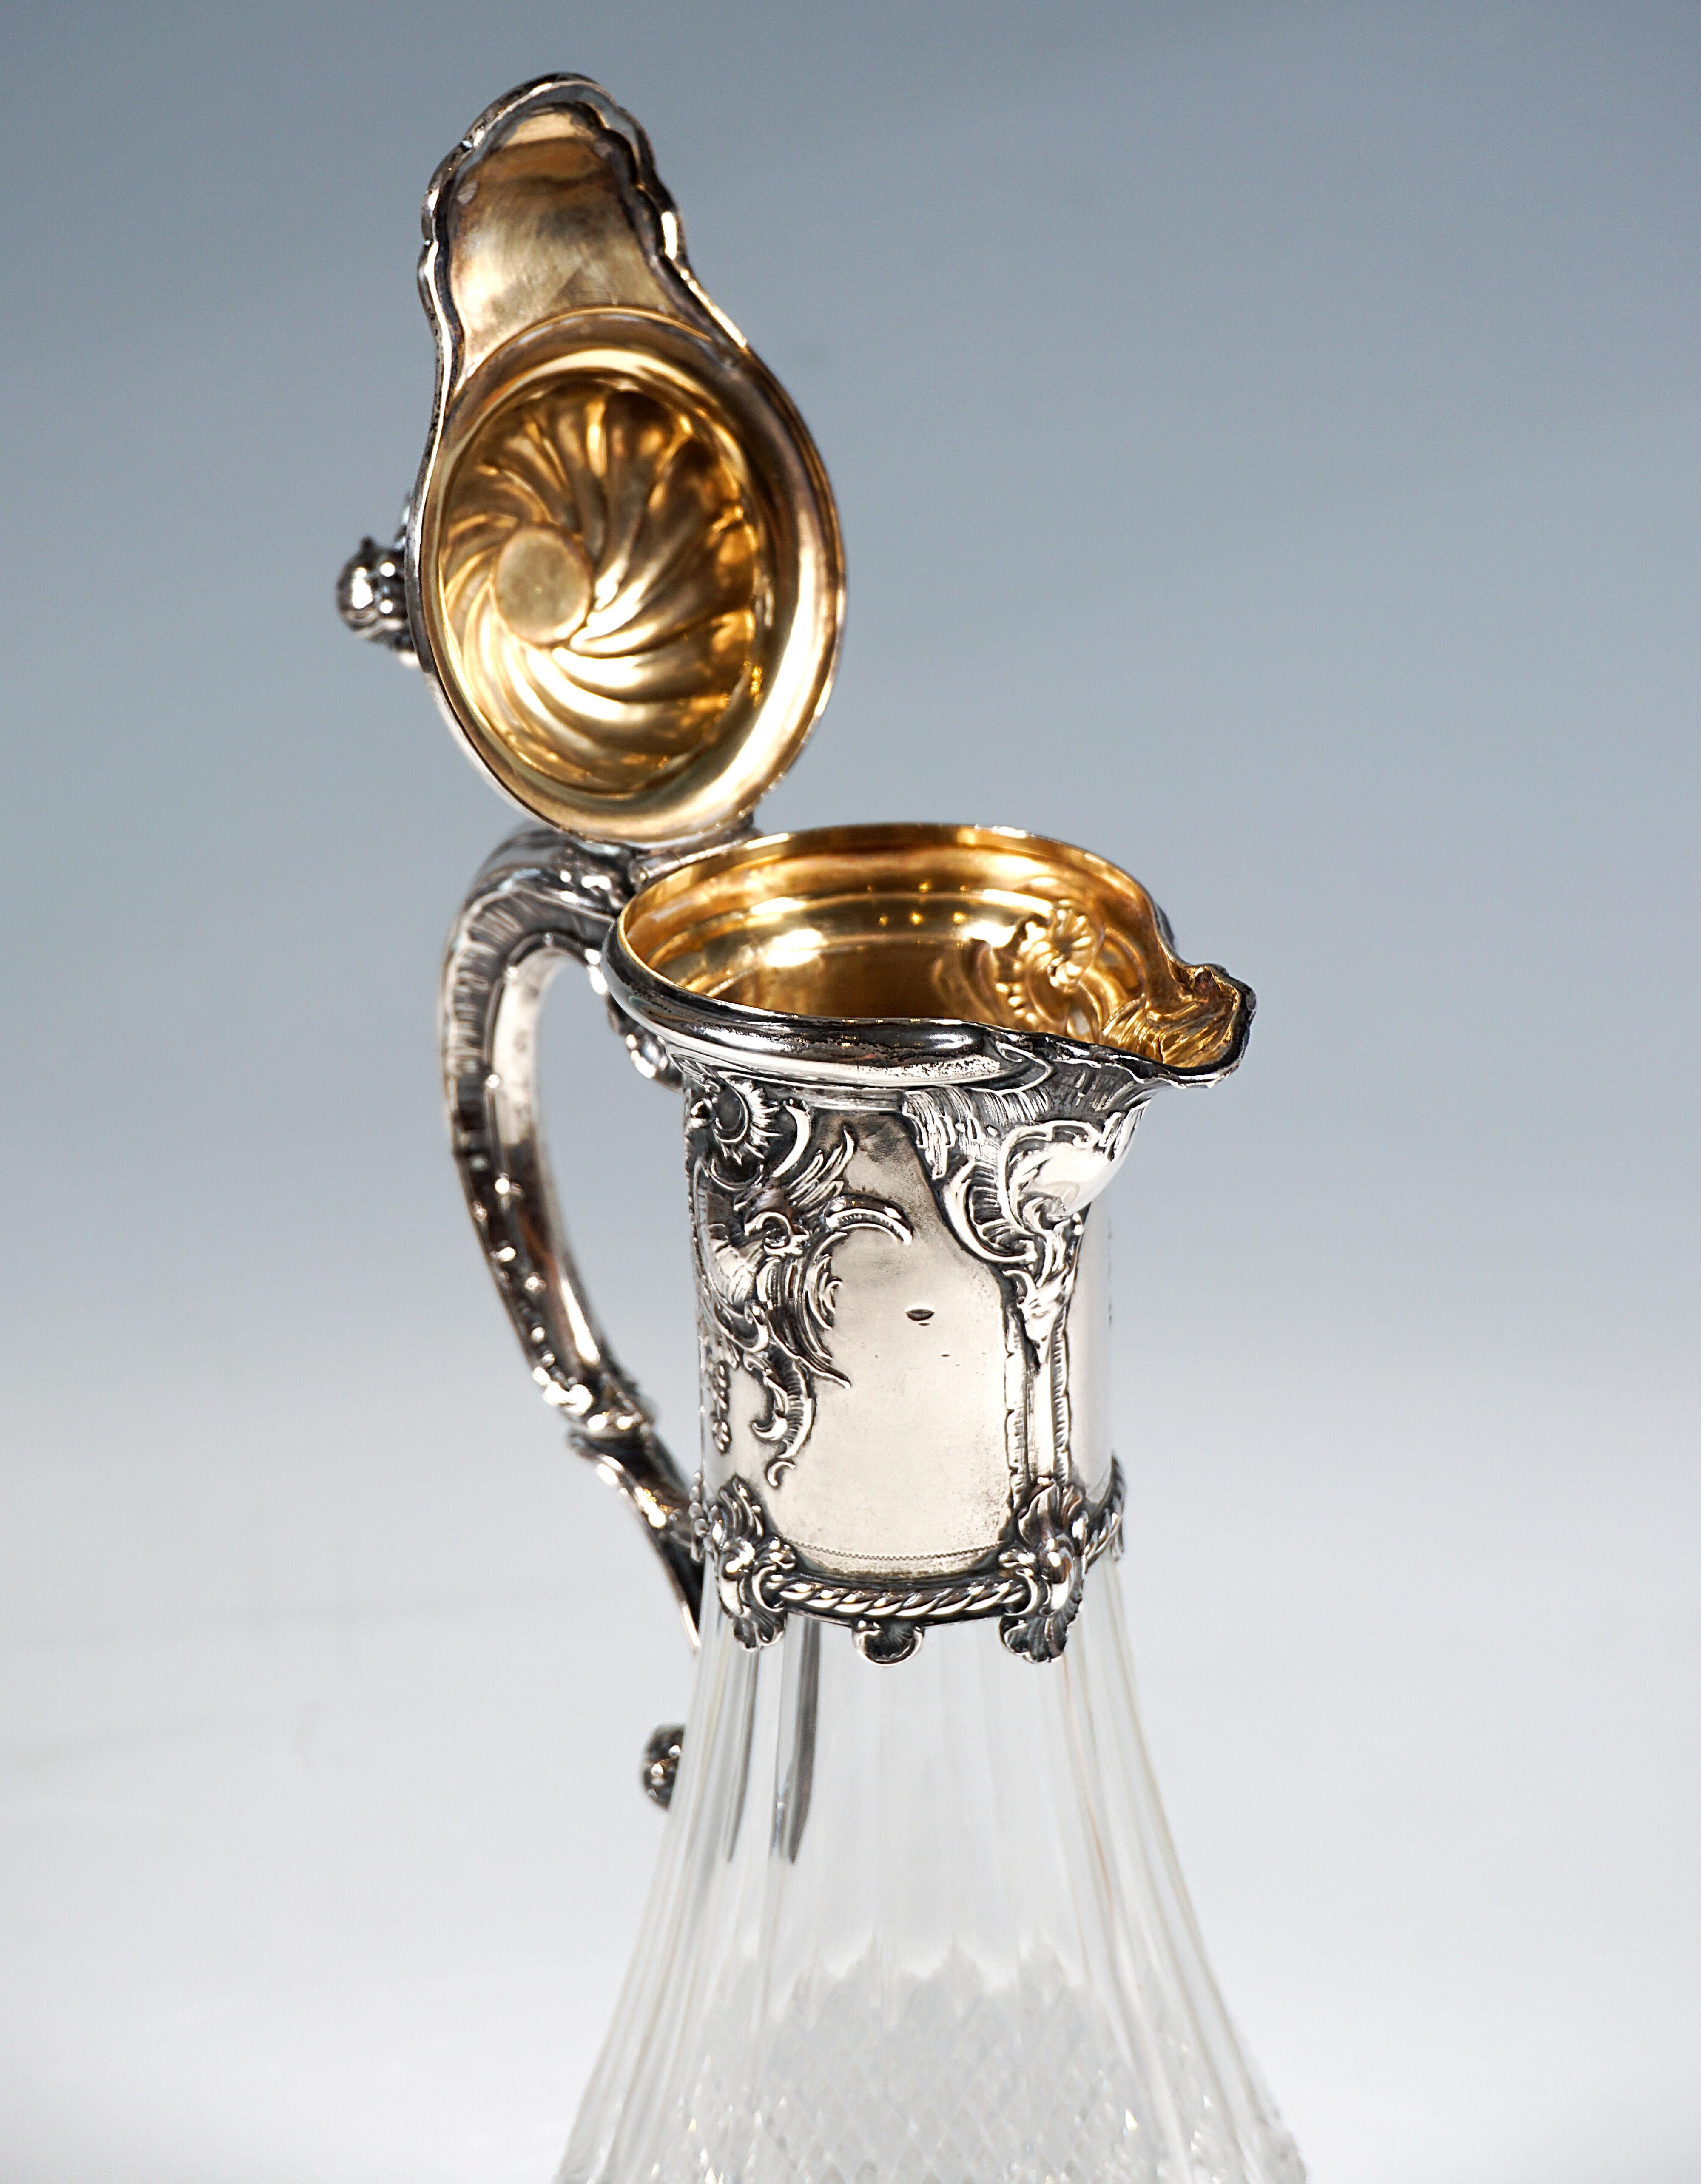 Faceted Art Nouveau Cut Glass Carafe with Silver Mount, Germany, Around 1900